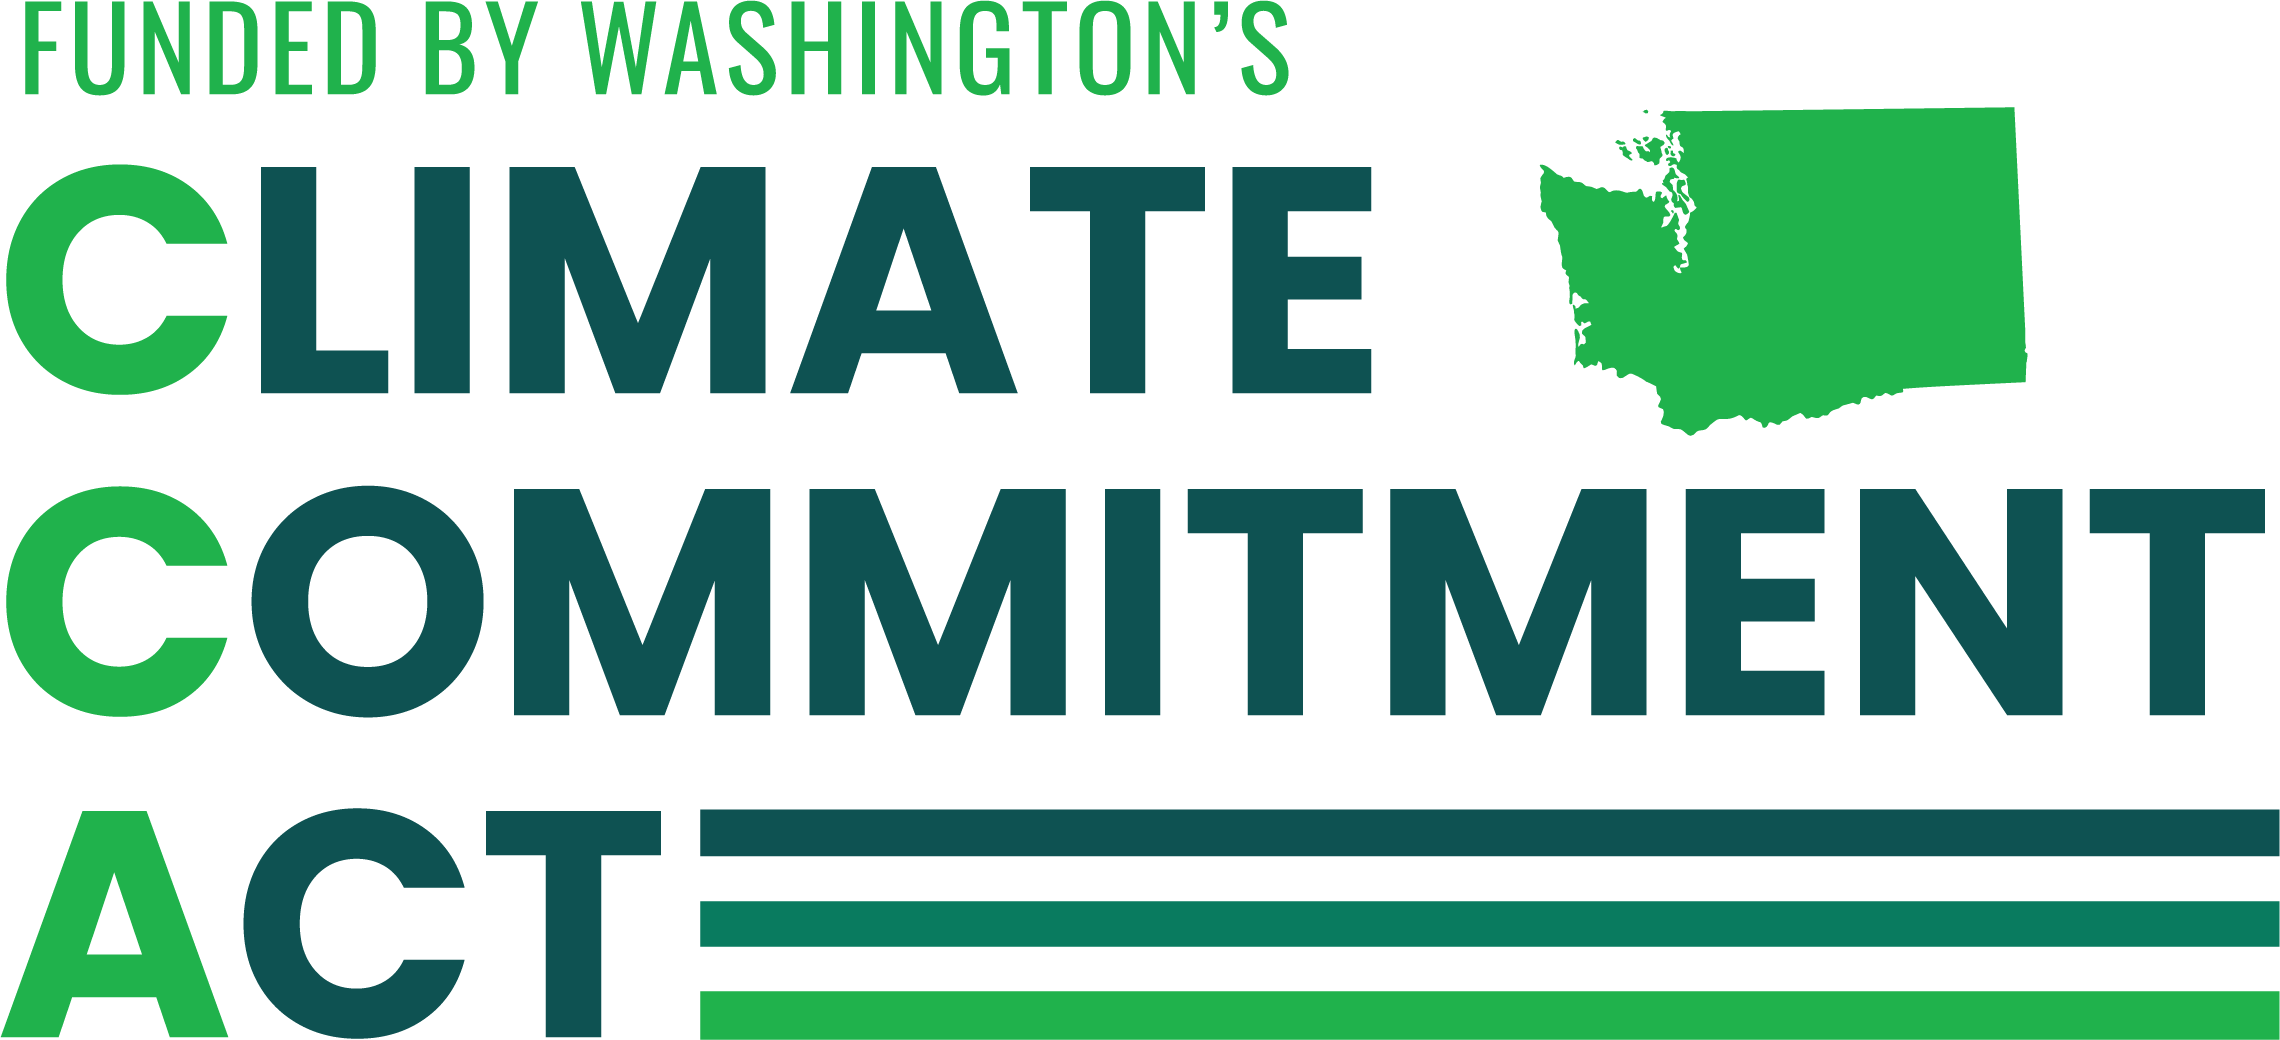 A graphic which reads "Funded by Washington's Climate Commitment Act" alongside an outline of the state of Washington.